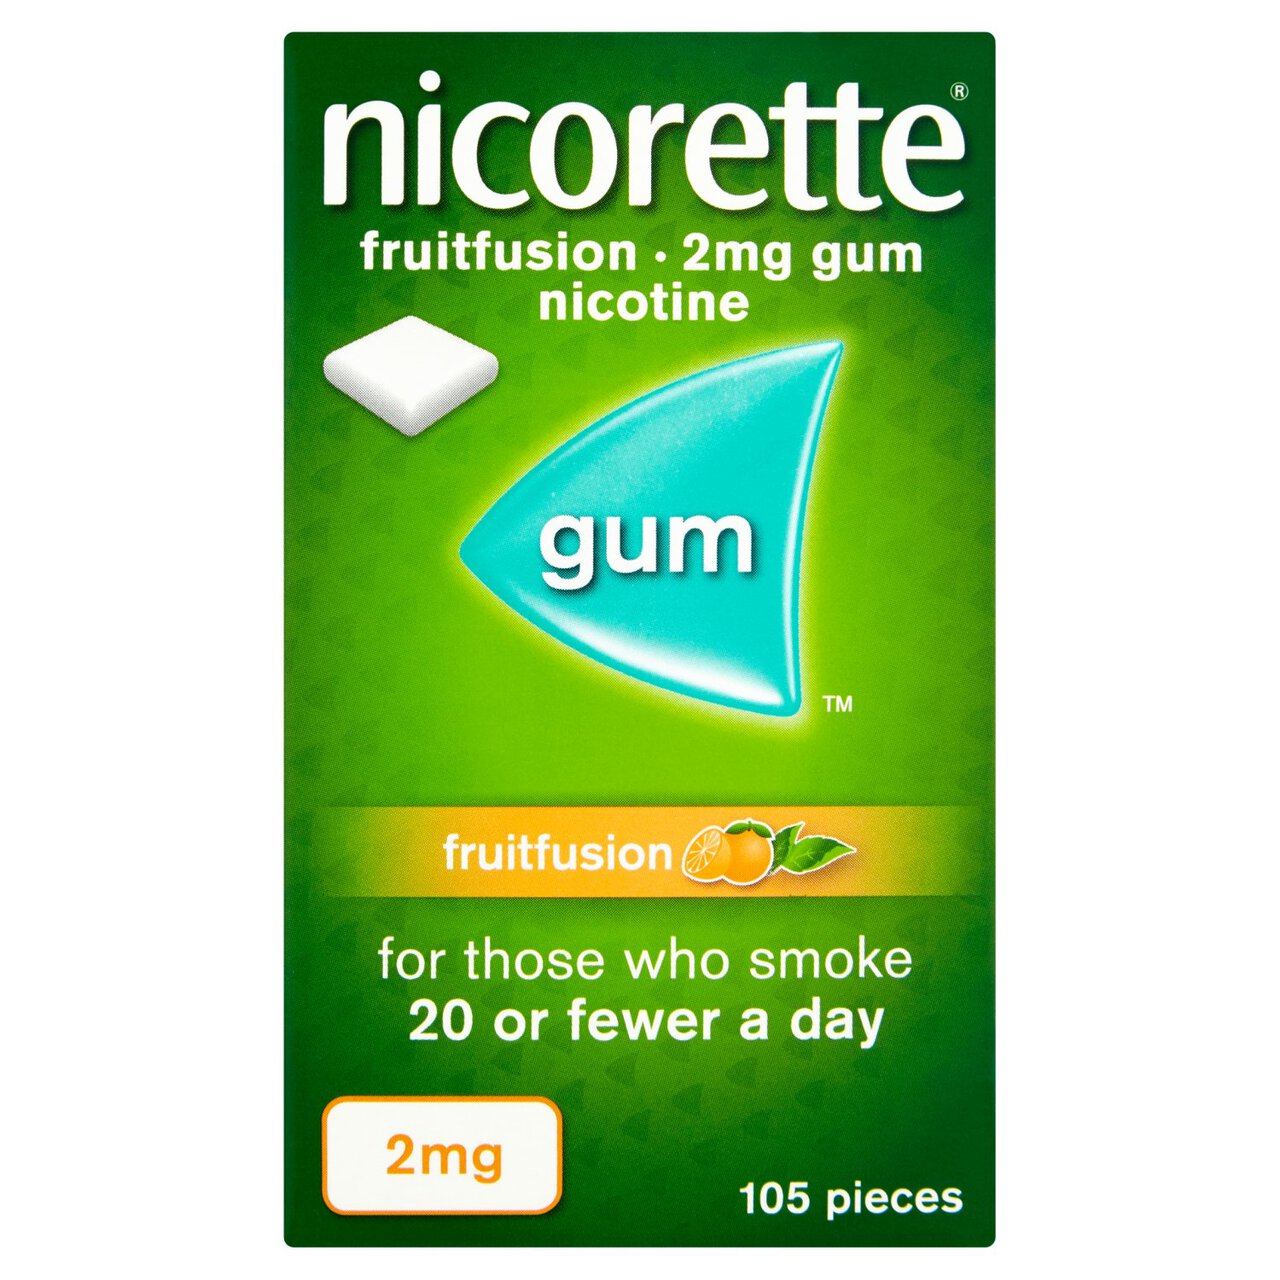 Nicorette Fruit Fusion Chewing Gum, 2 mg, 105 Pieces (Stop Smoking Aid) 105 per pack